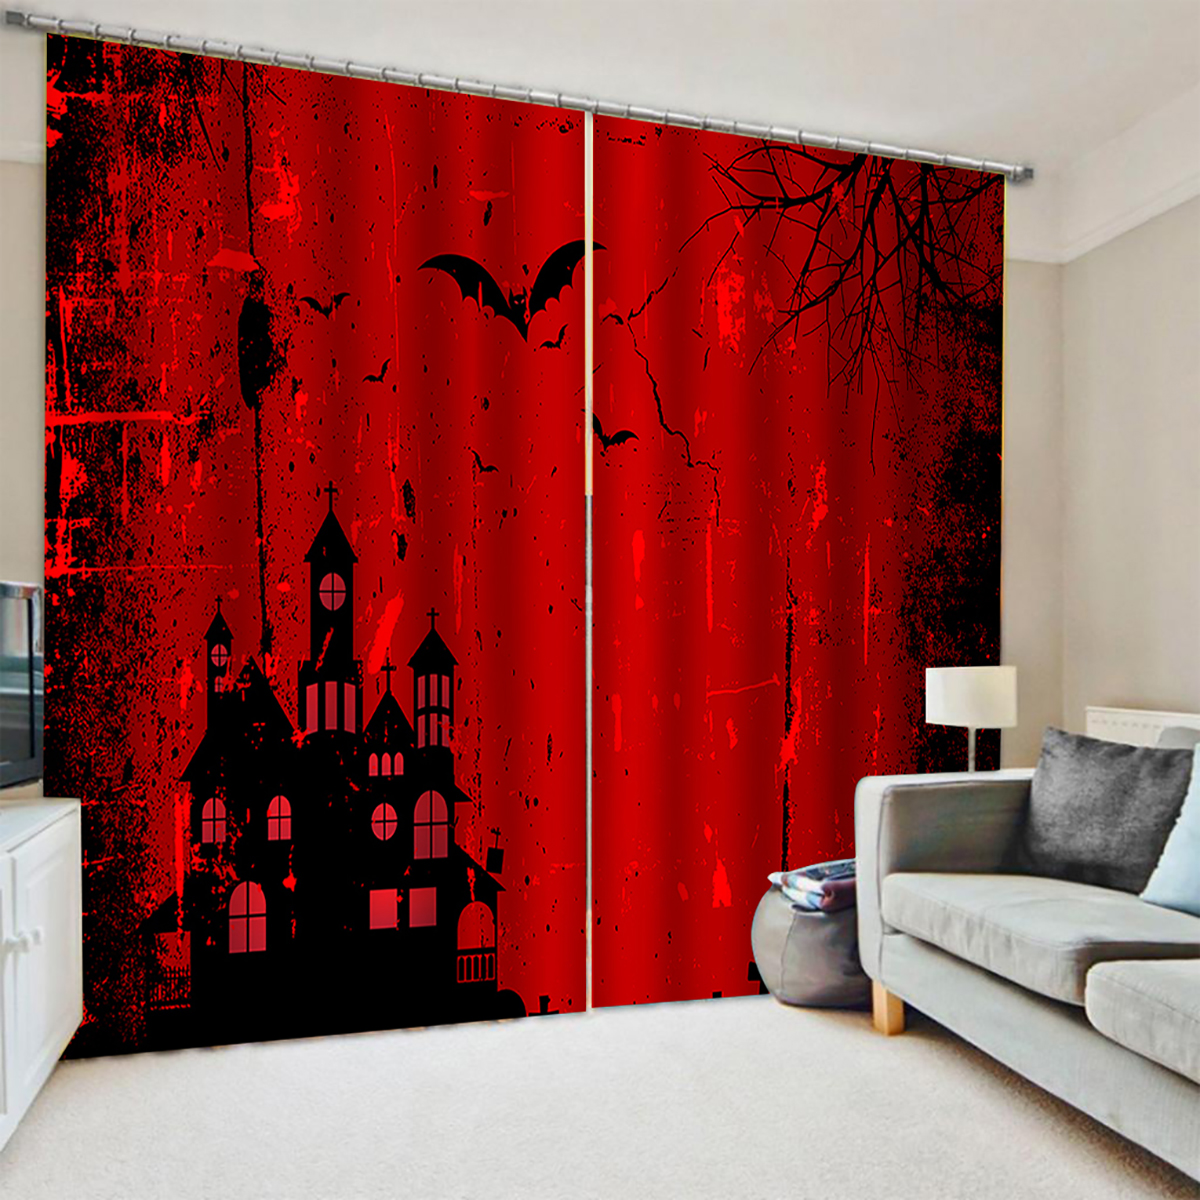 132160cm-Blackout-Window-Curtains-Halloween-Printed-Curtains-for-Living-Room-Festival-Decoration-1788701-4